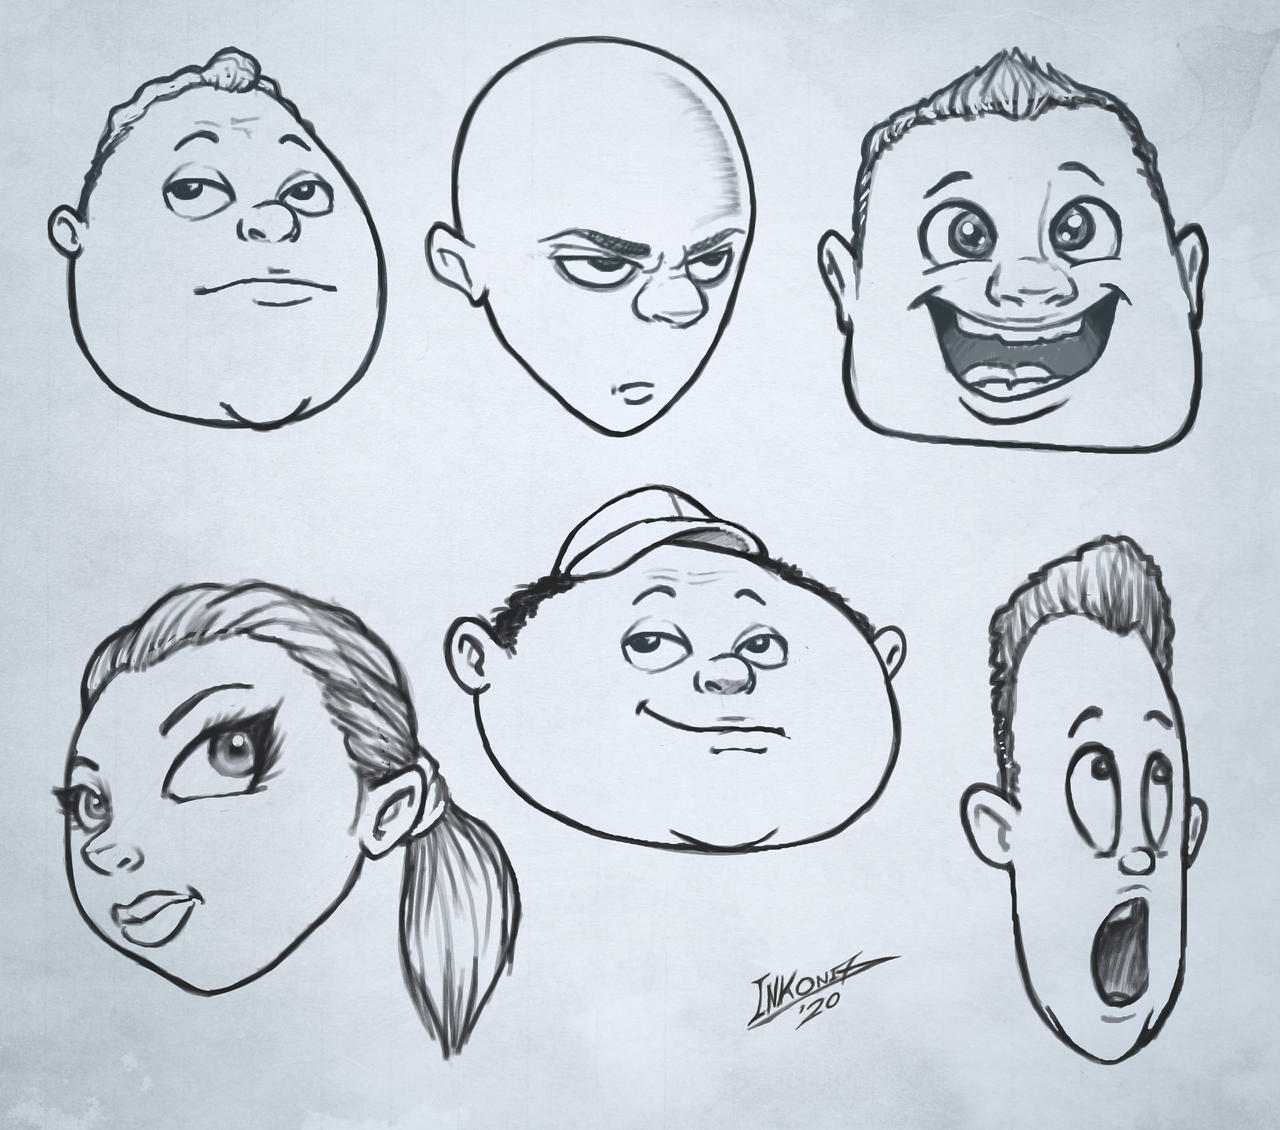 How to draw Cartoons Using Simple Shapes # 1 by Inkonix on DeviantArt